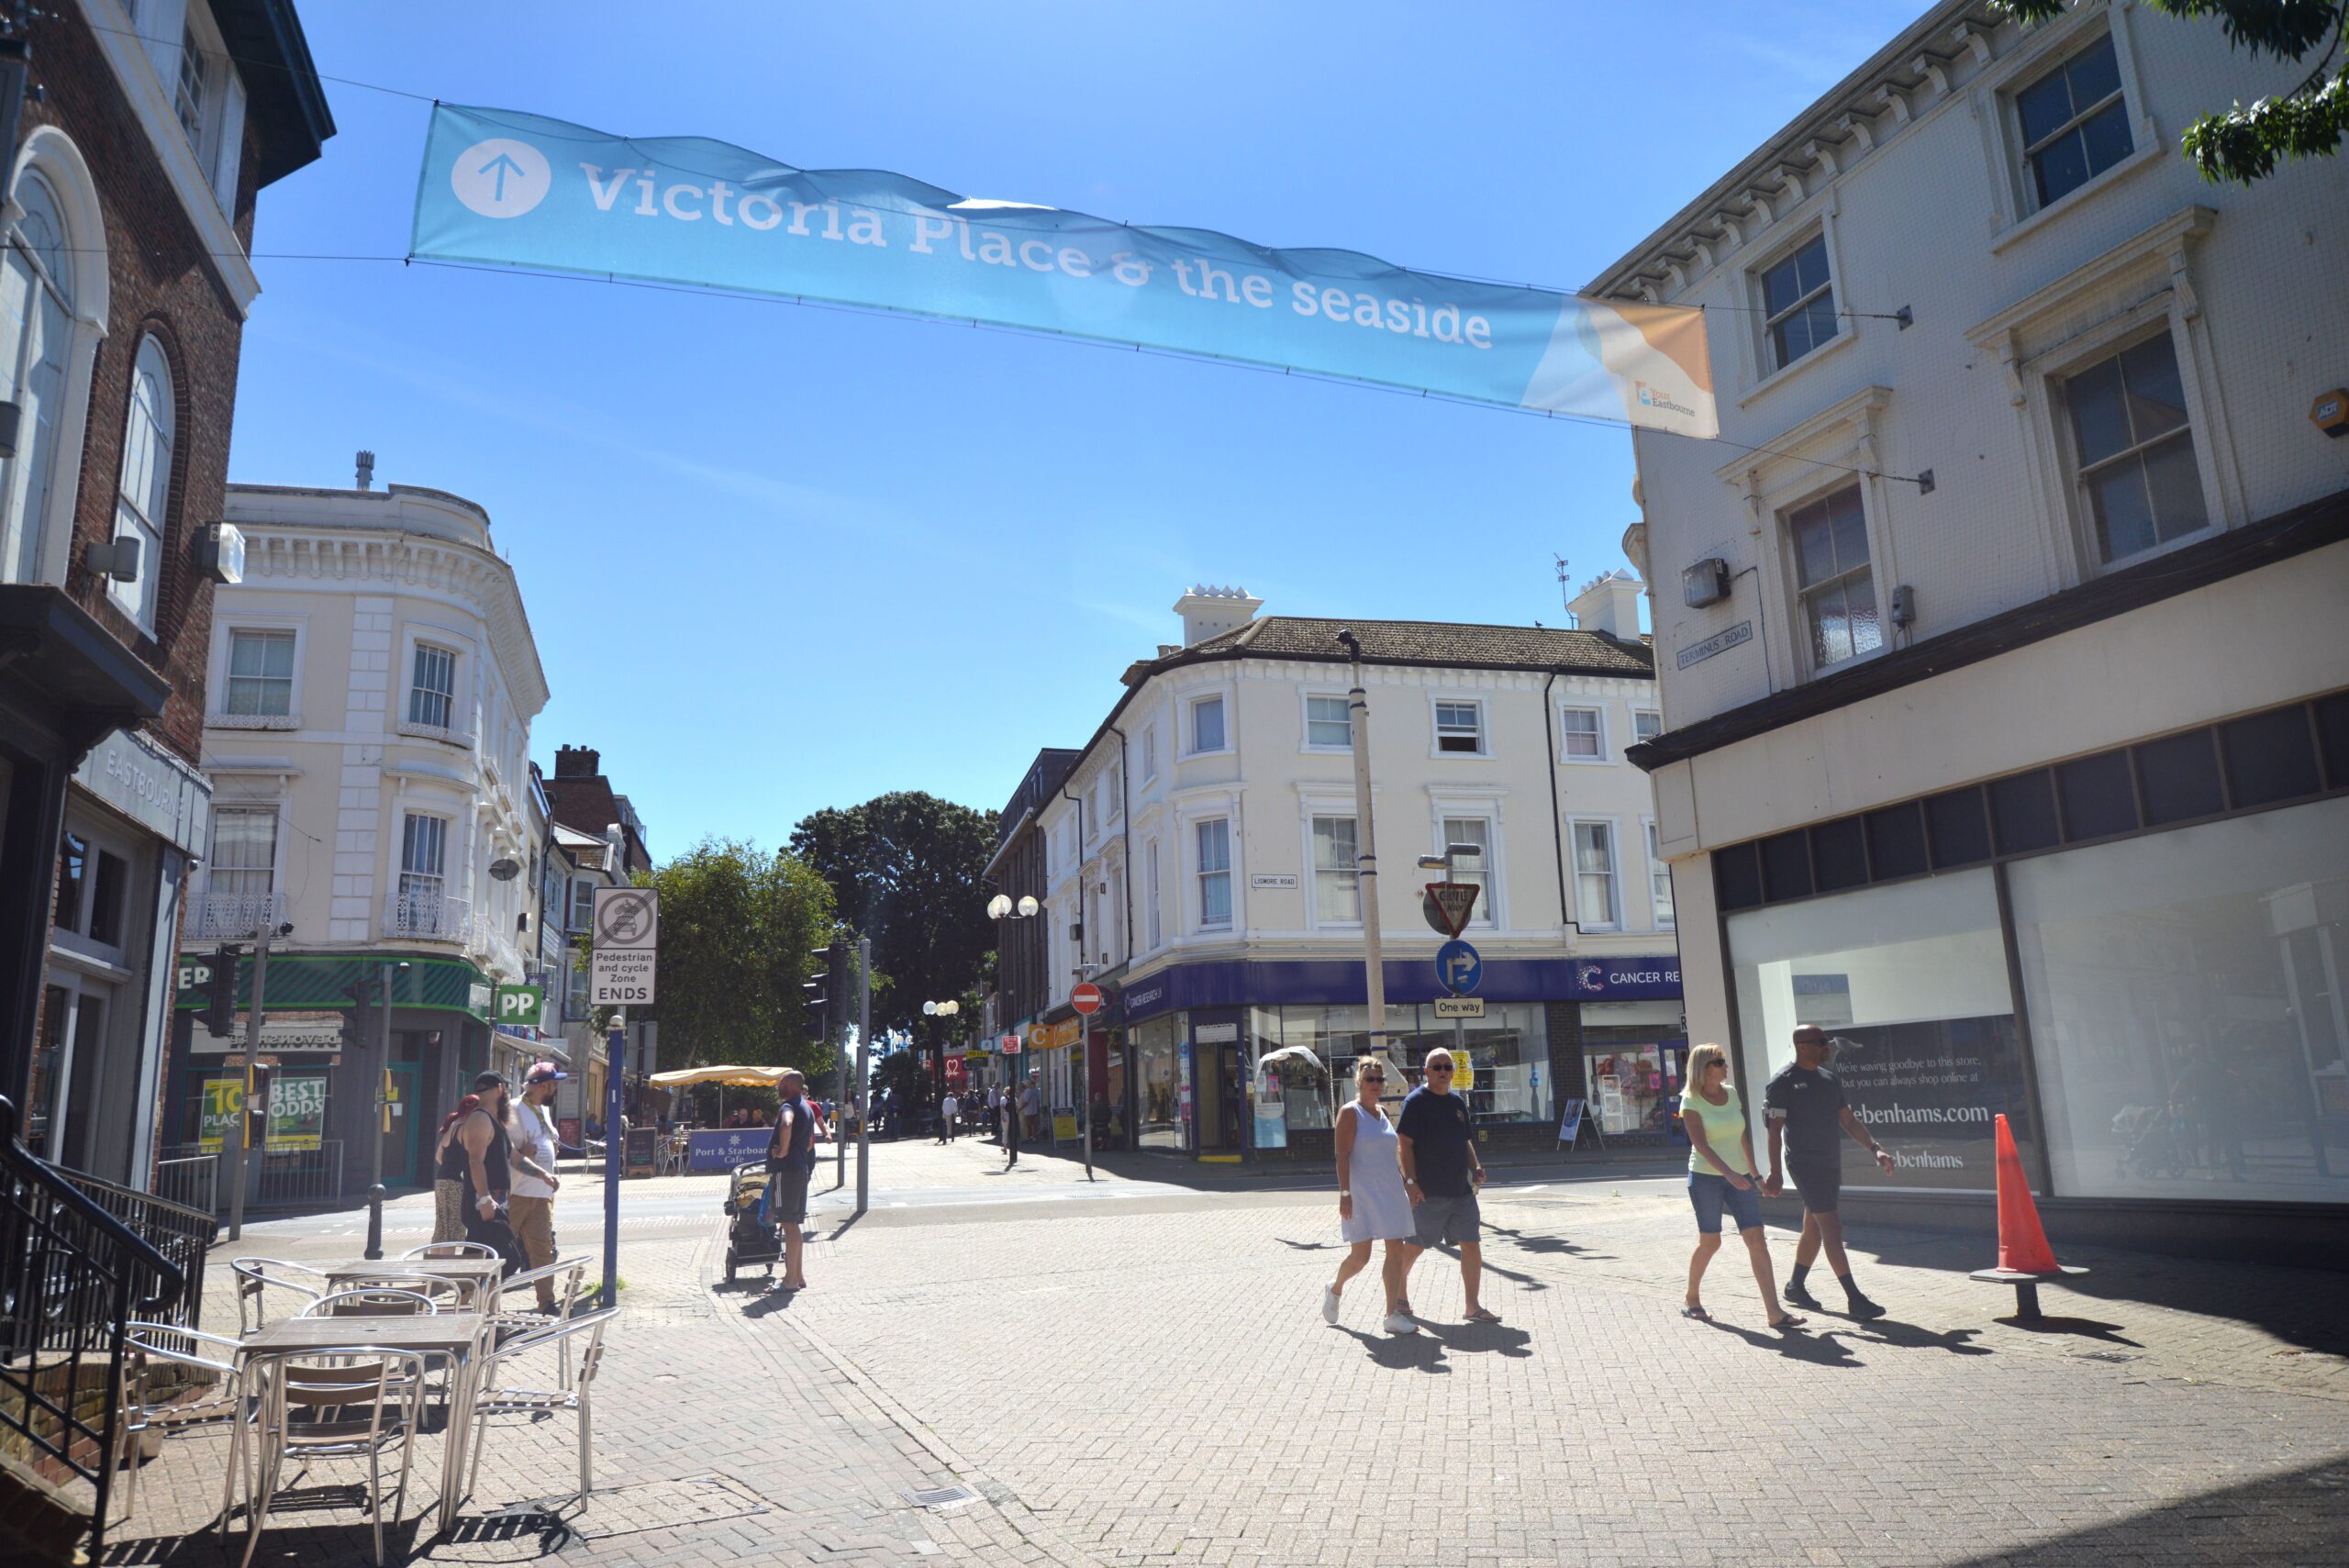 Eastbourne Town Centre